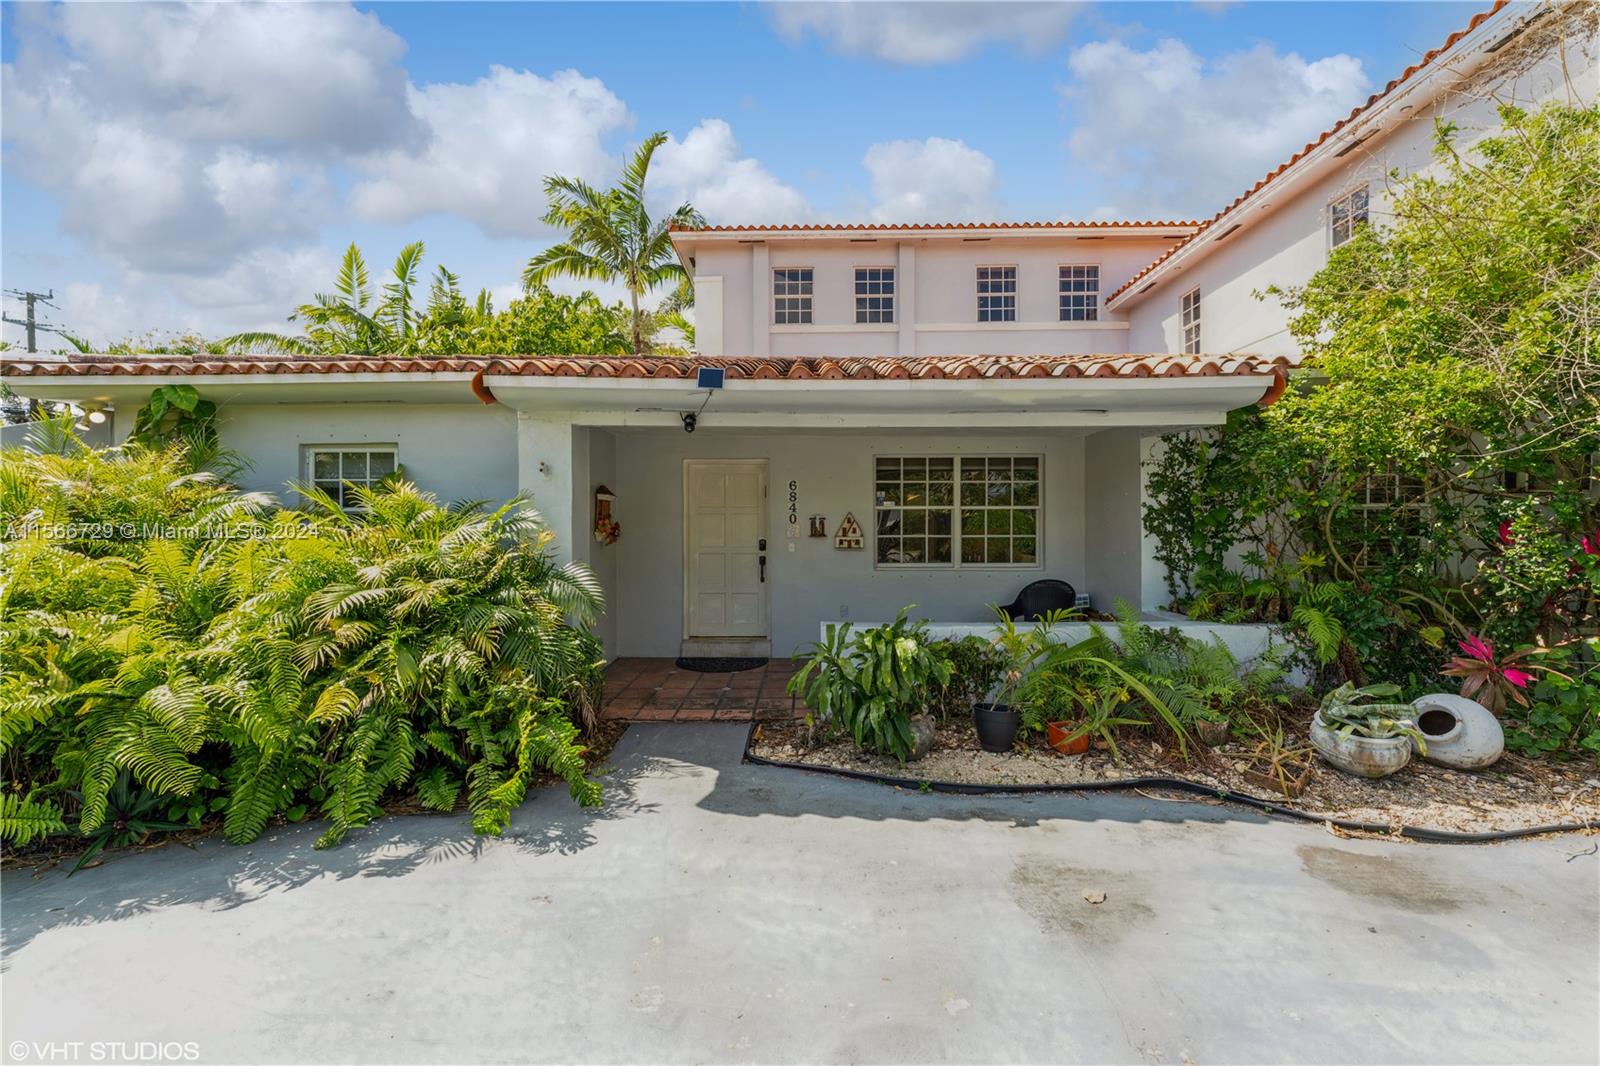 6840 SW 49th St, Miami, Florida 33155, 4 Bedrooms Bedrooms, ,3 BathroomsBathrooms,Residential,For Sale,6840 SW 49th St,A11566729